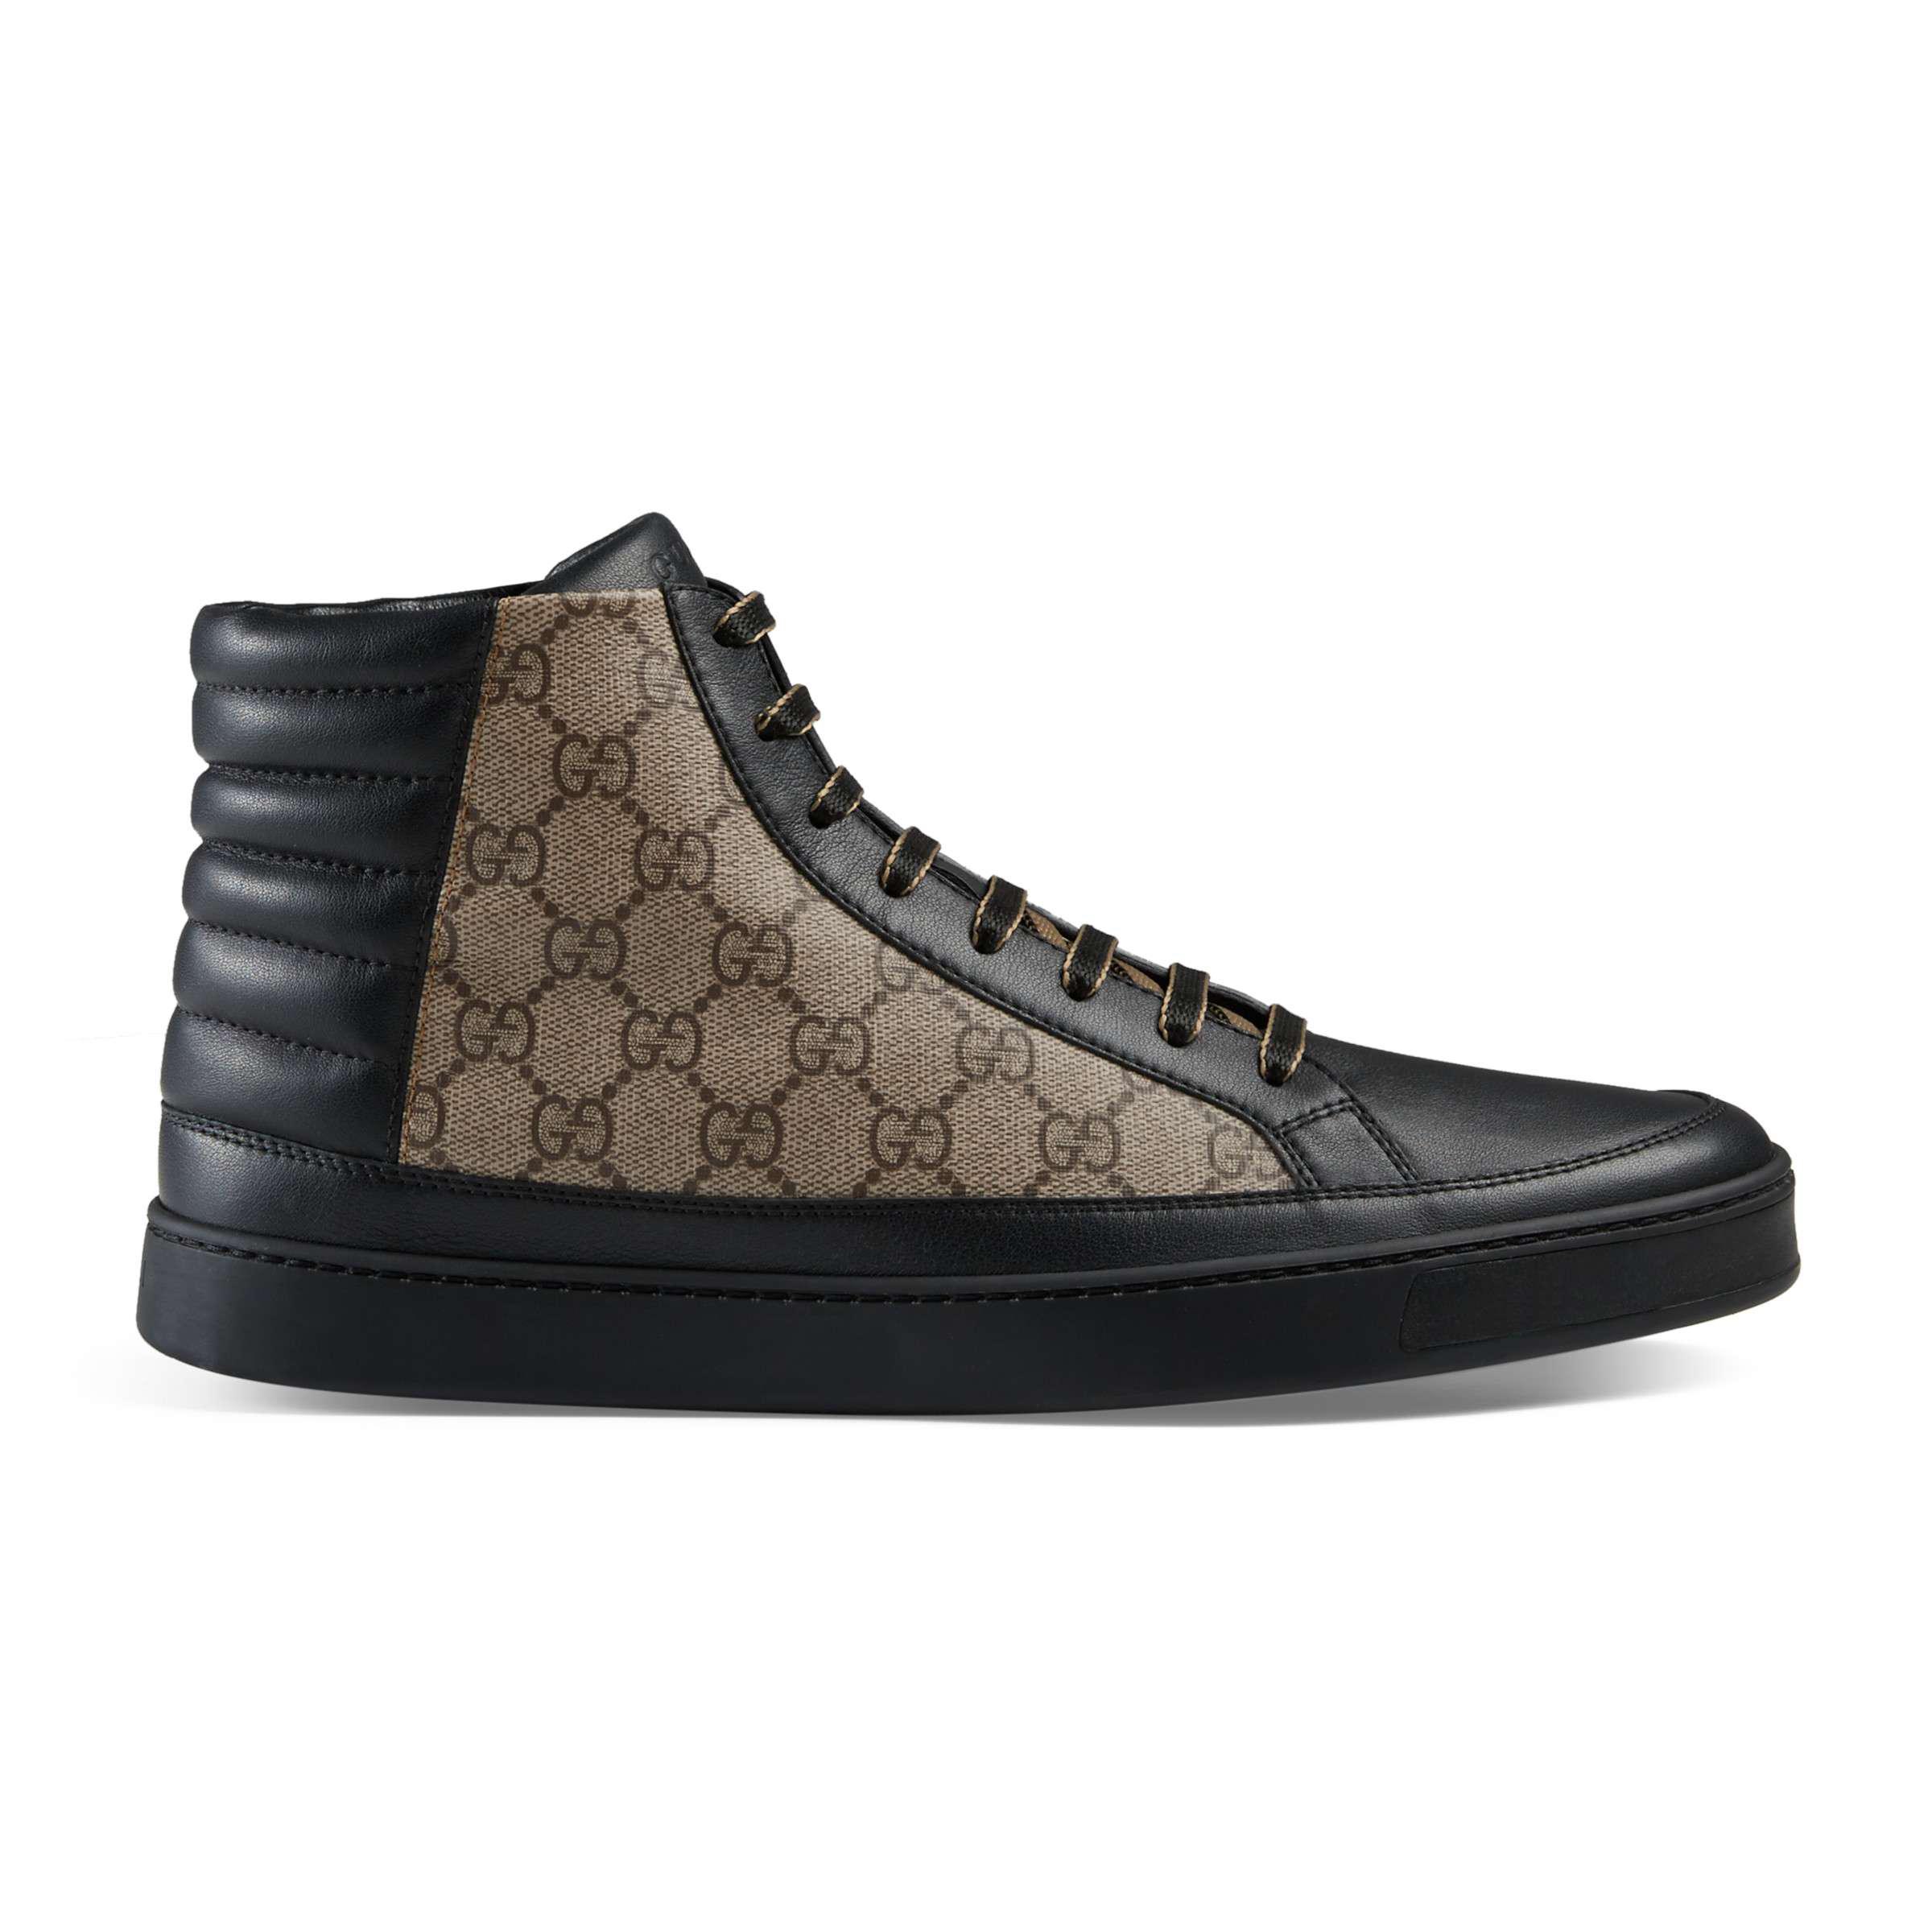 gucci sneakers high top black